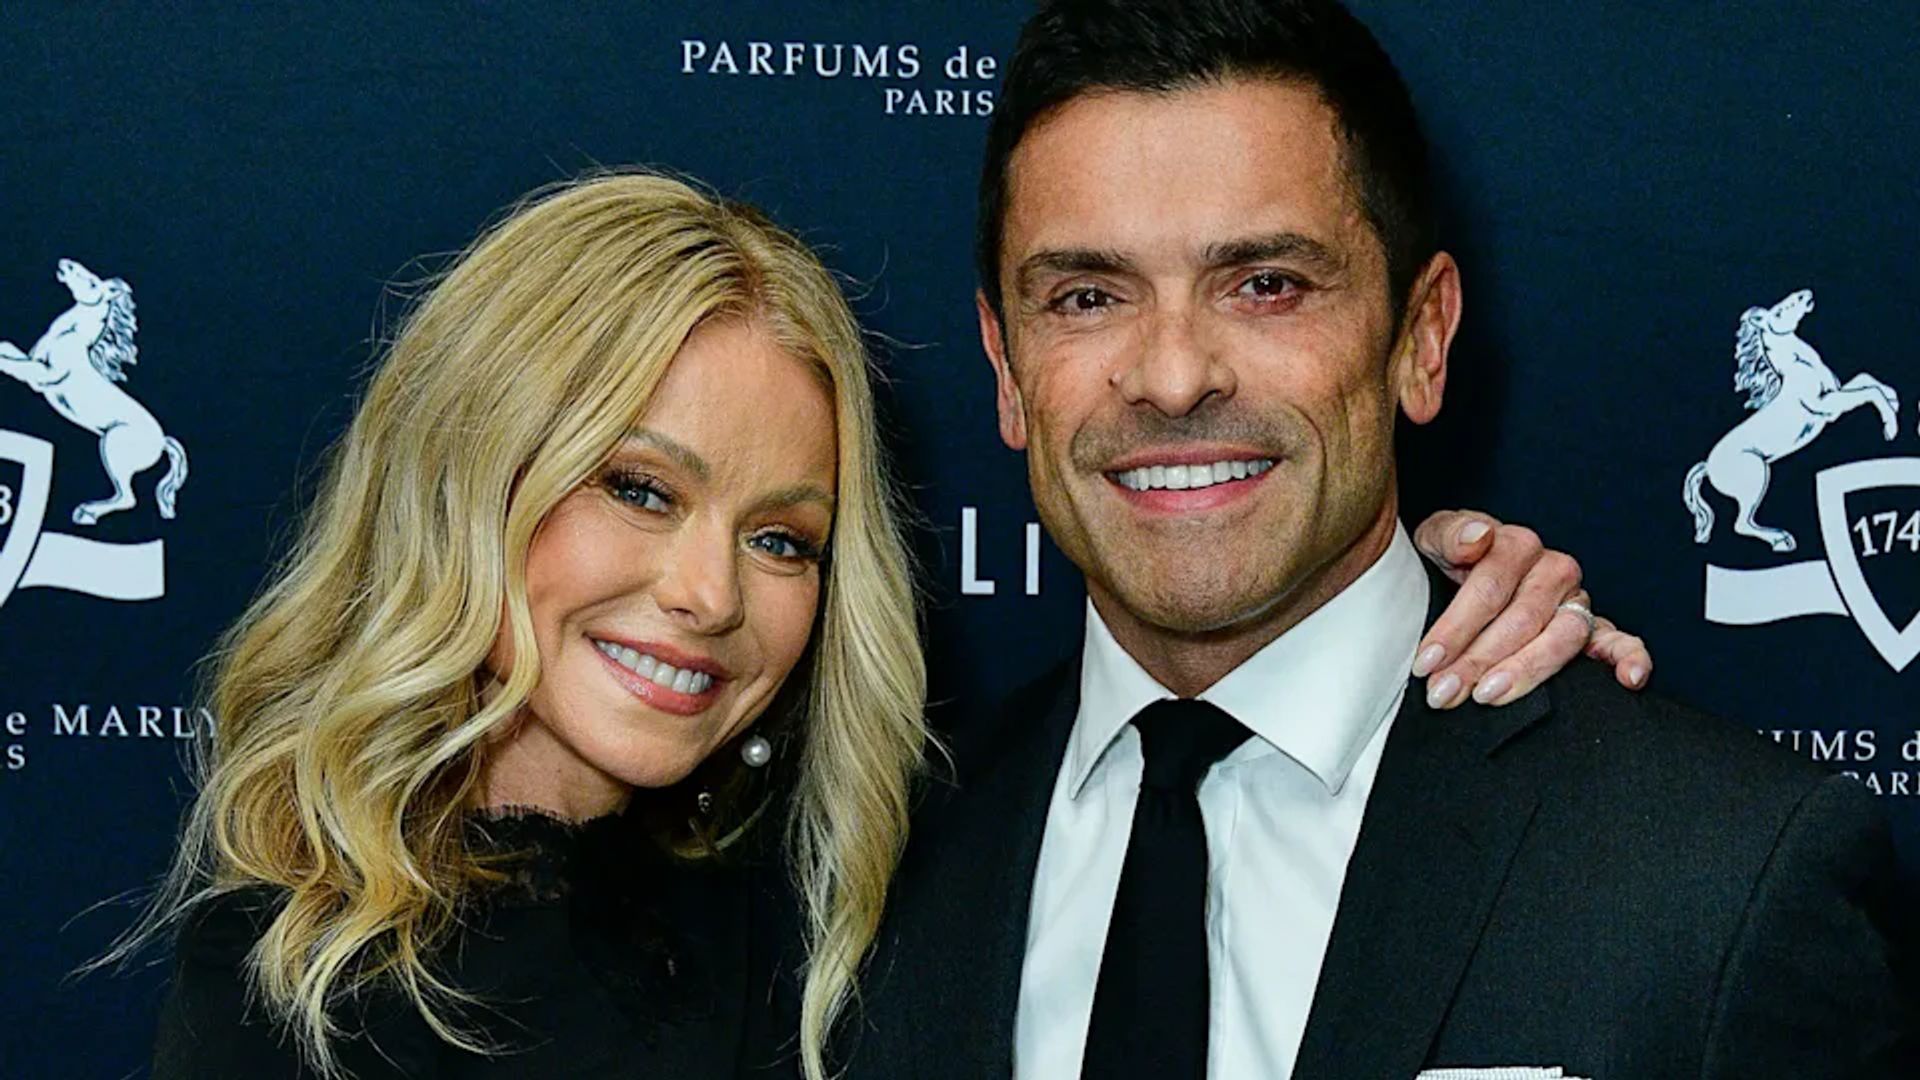 Kelly Ripa and Mark Consuelos co-hosting criticized for ‘painful fake banter’